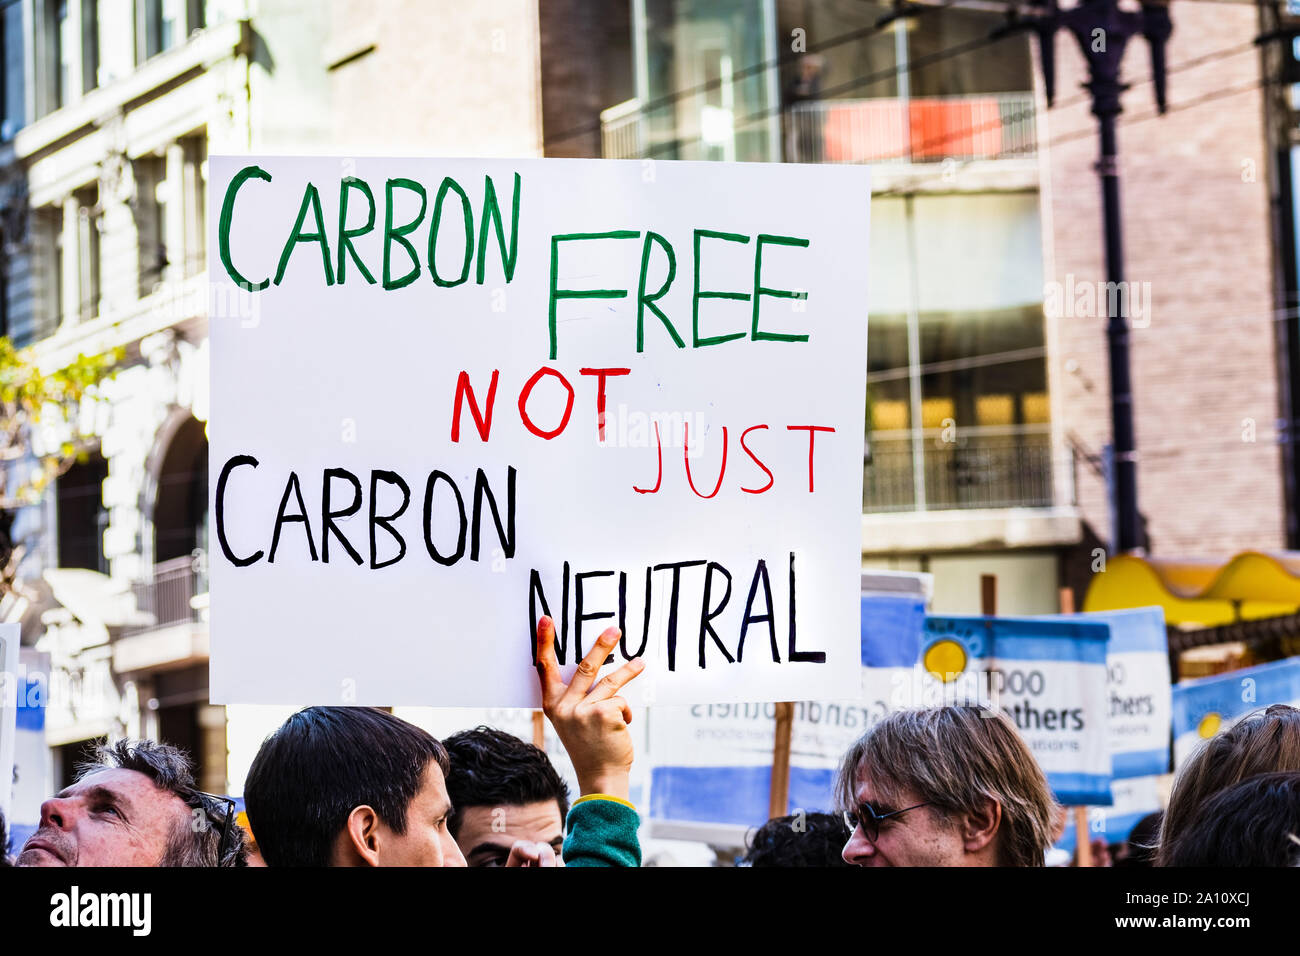 Sep 20, 2019 San Francisco / CA / USA - Carbon Free not just Carbon Neutral placard raised at the Global Youth Climate Strike Rally and March in downt Stock Photo